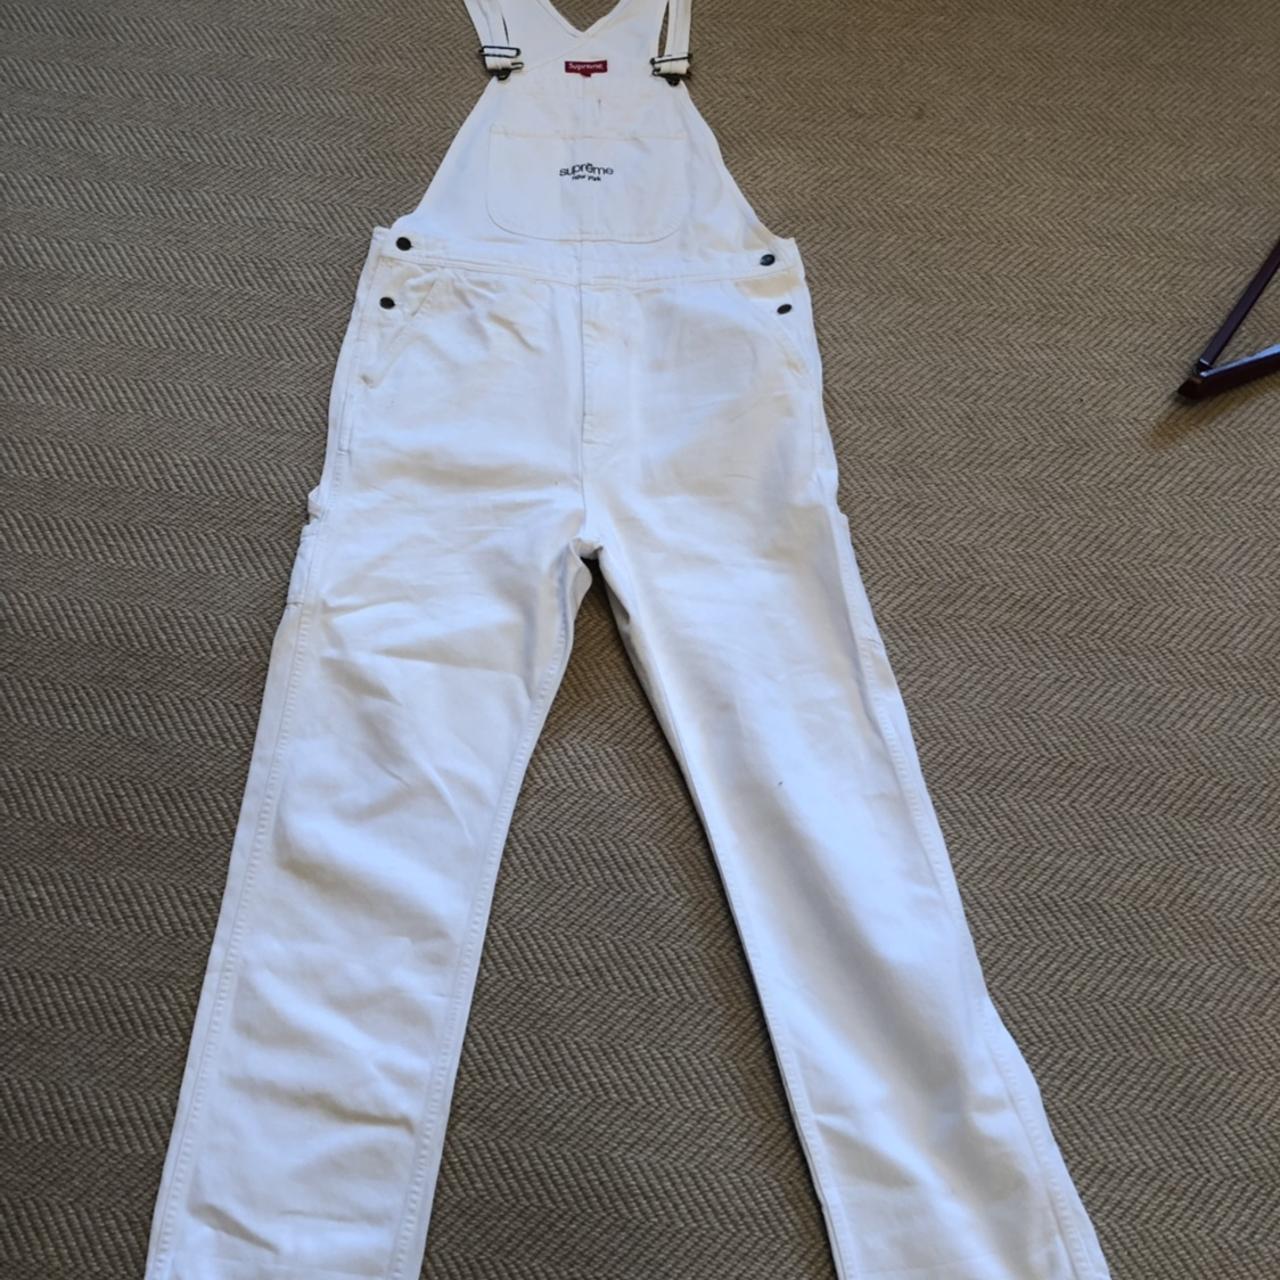 SUPREME DUNGAREES, Classic Logo, 8/10, Size L, (Not...